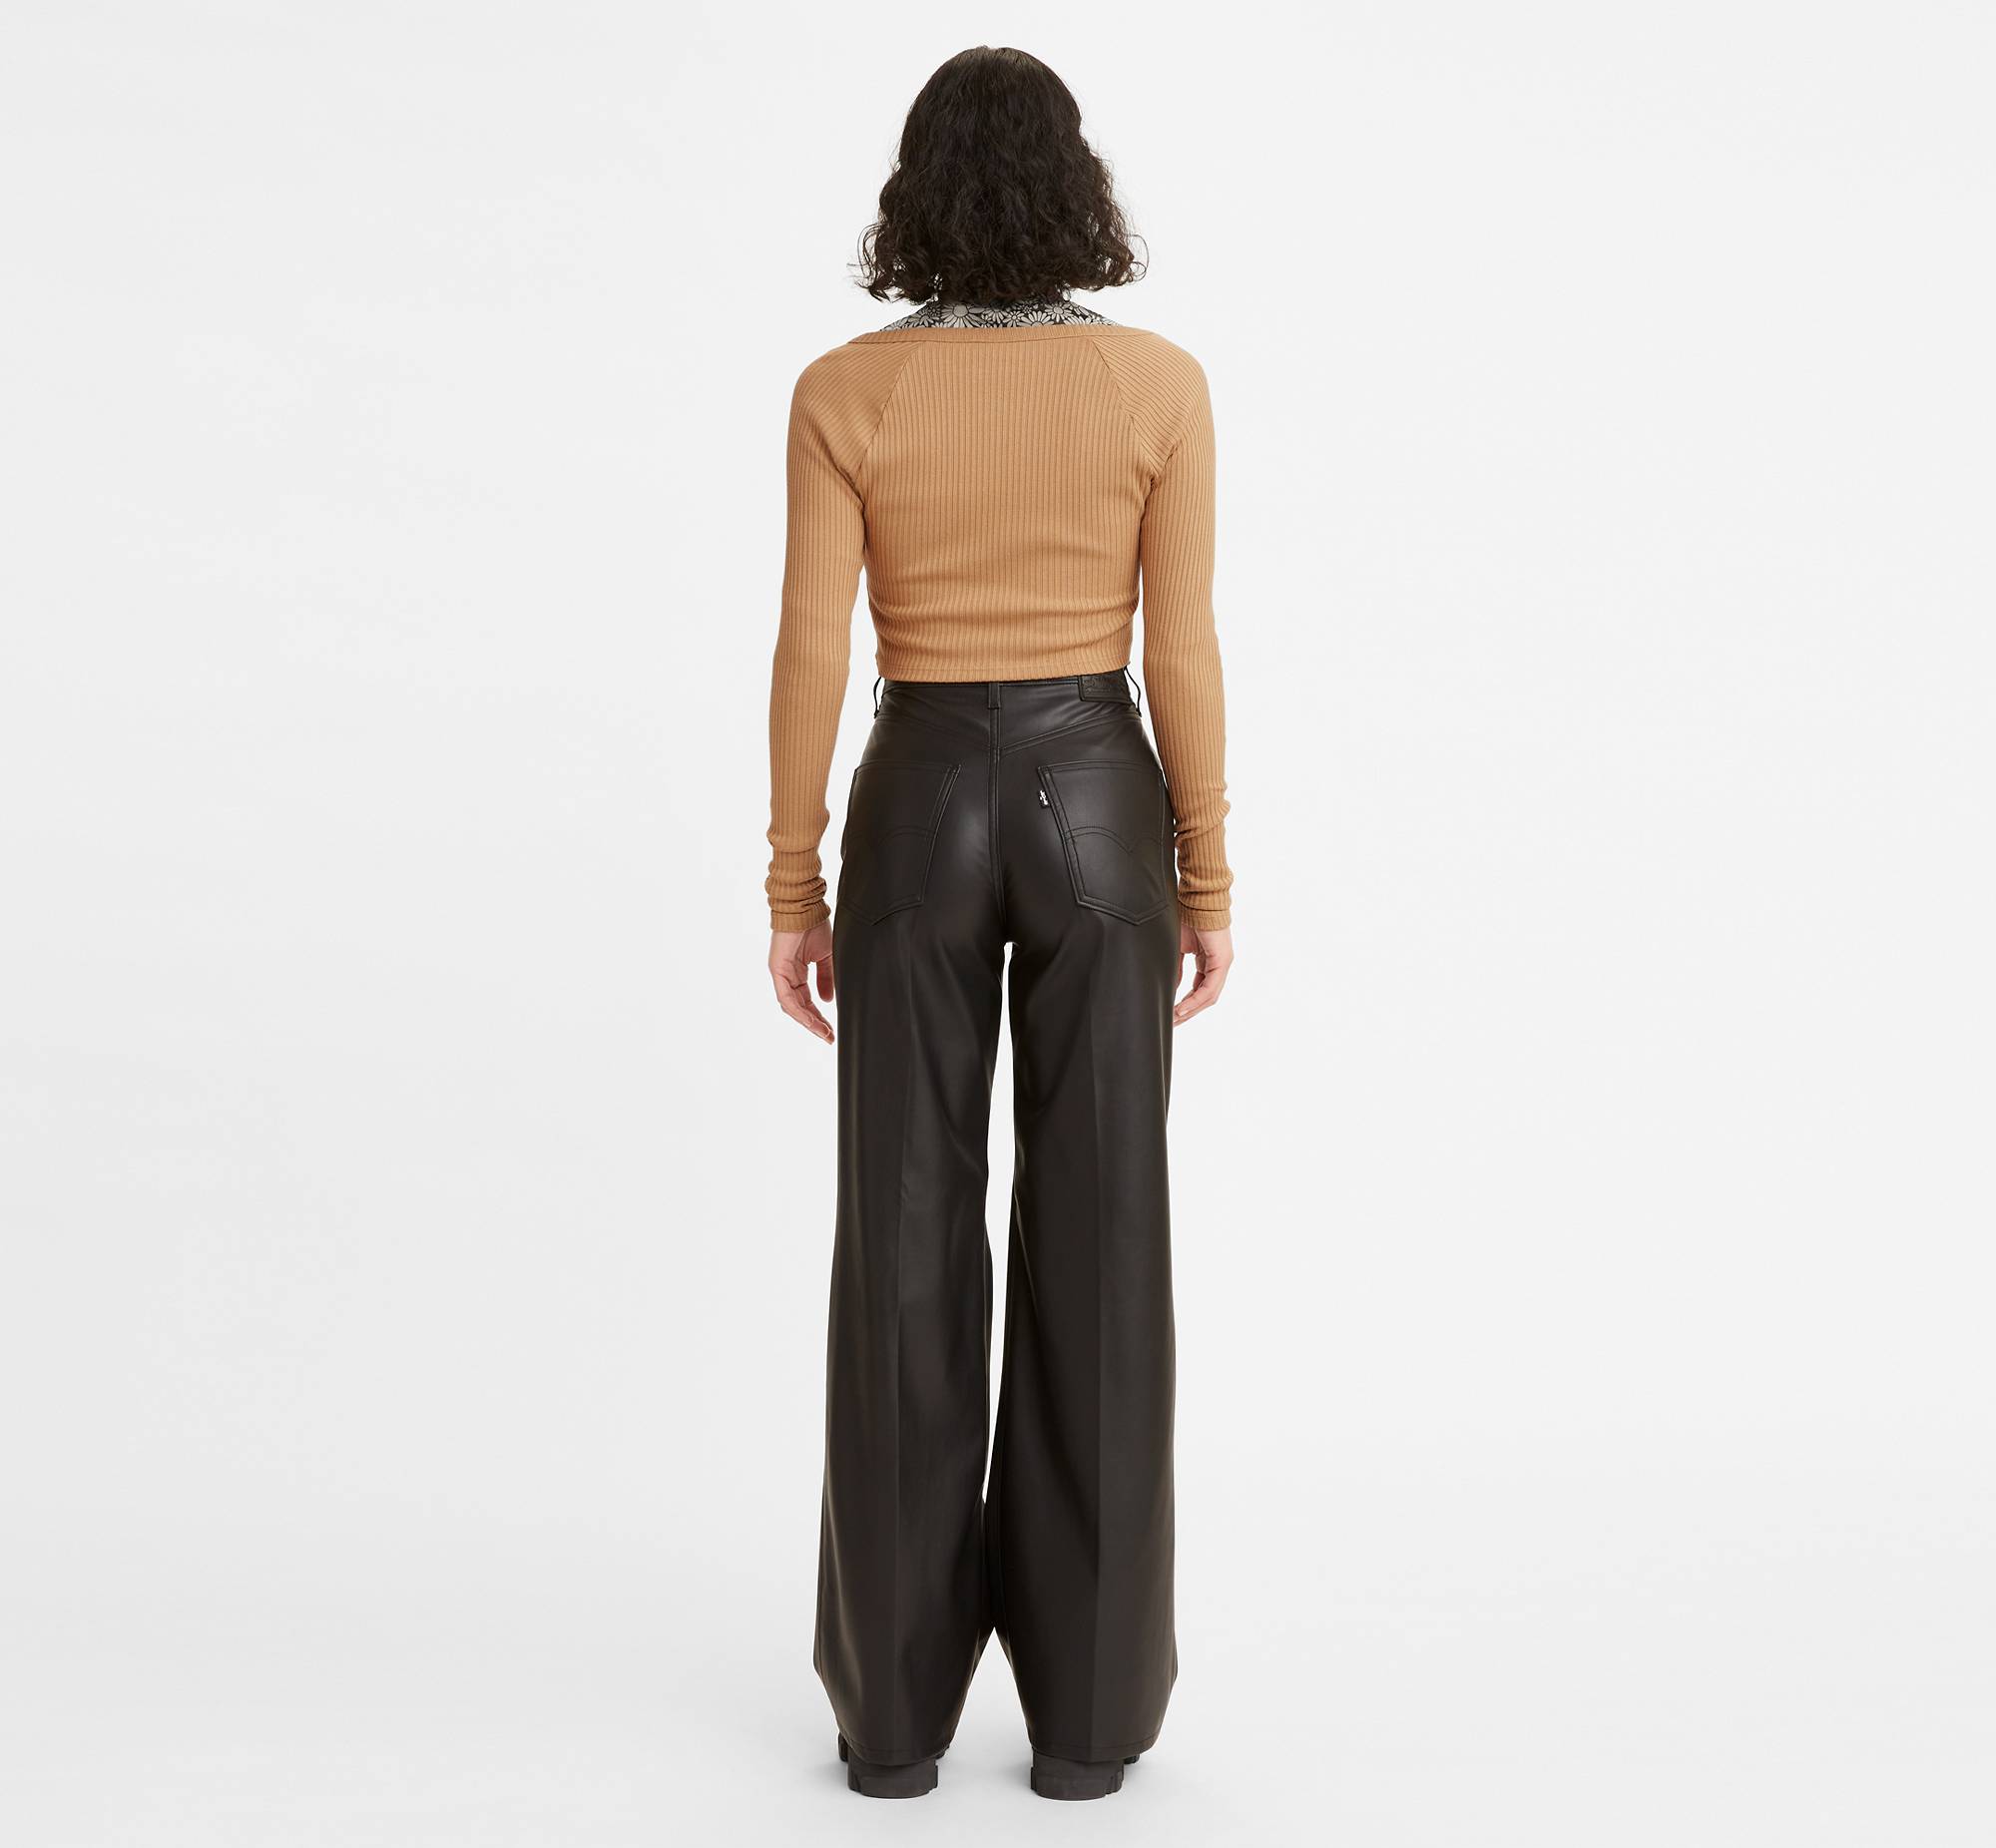 High Rise Vegan Leather '70s Flare Pants